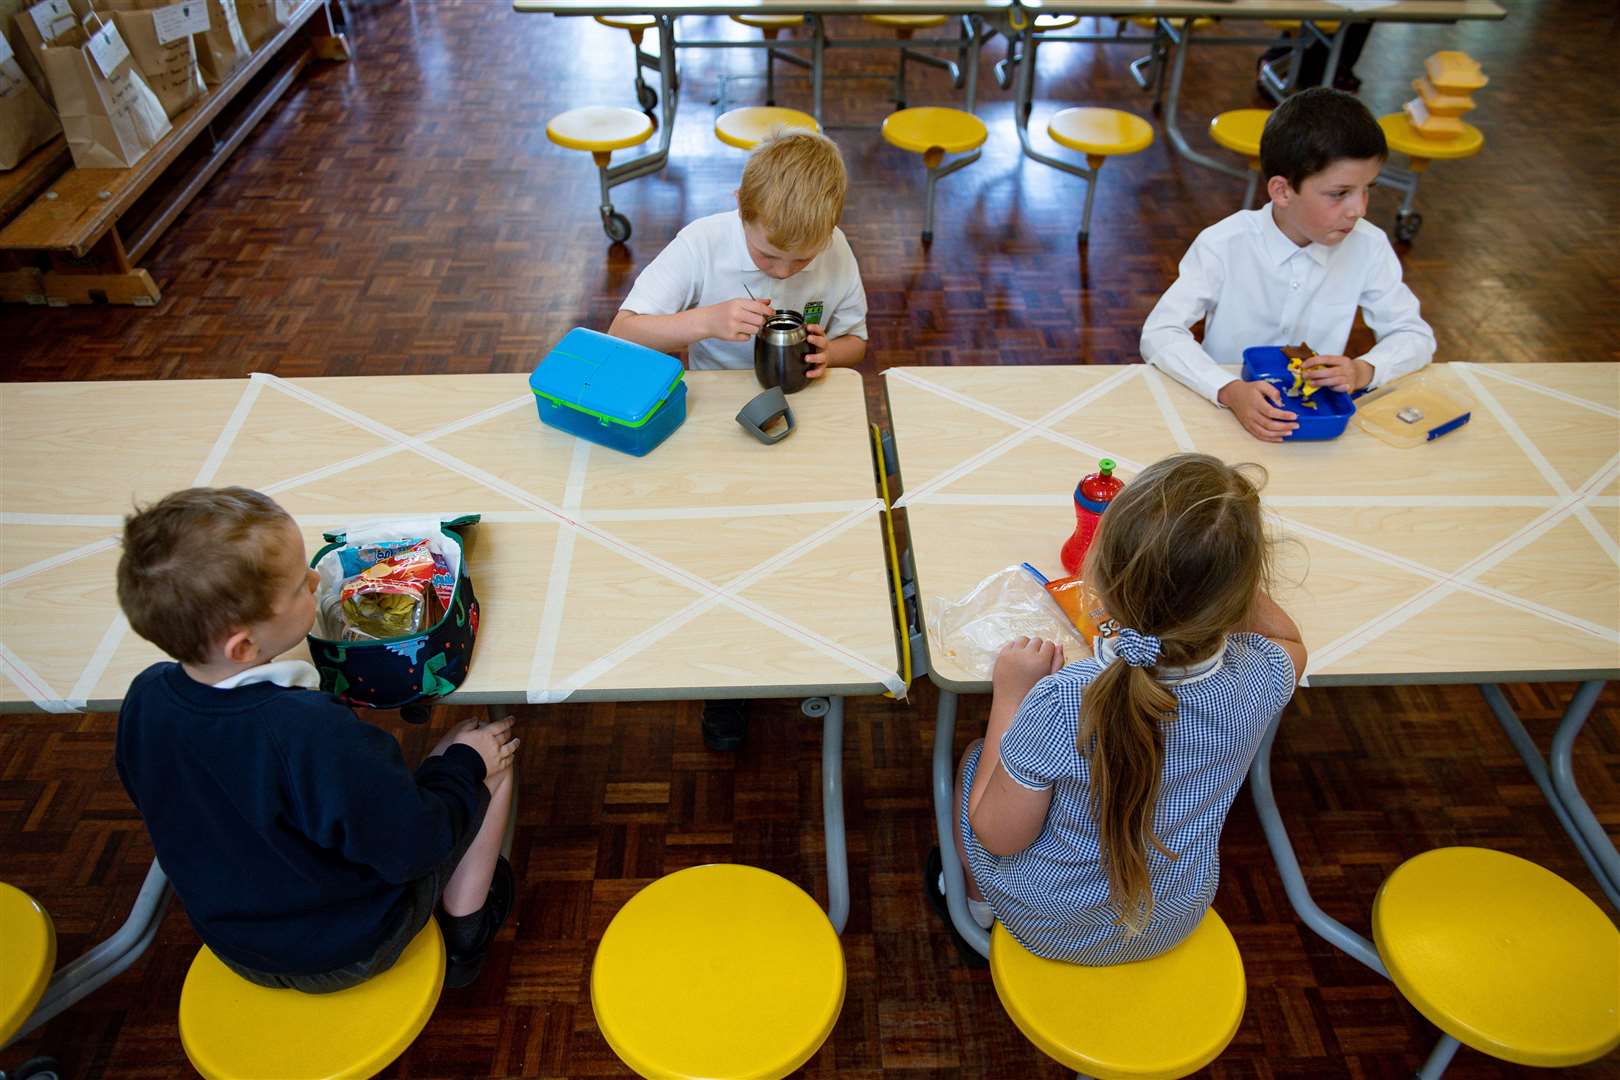 Primary schools in England will reopen to more pupils from June 1 (Jacob King/PA)